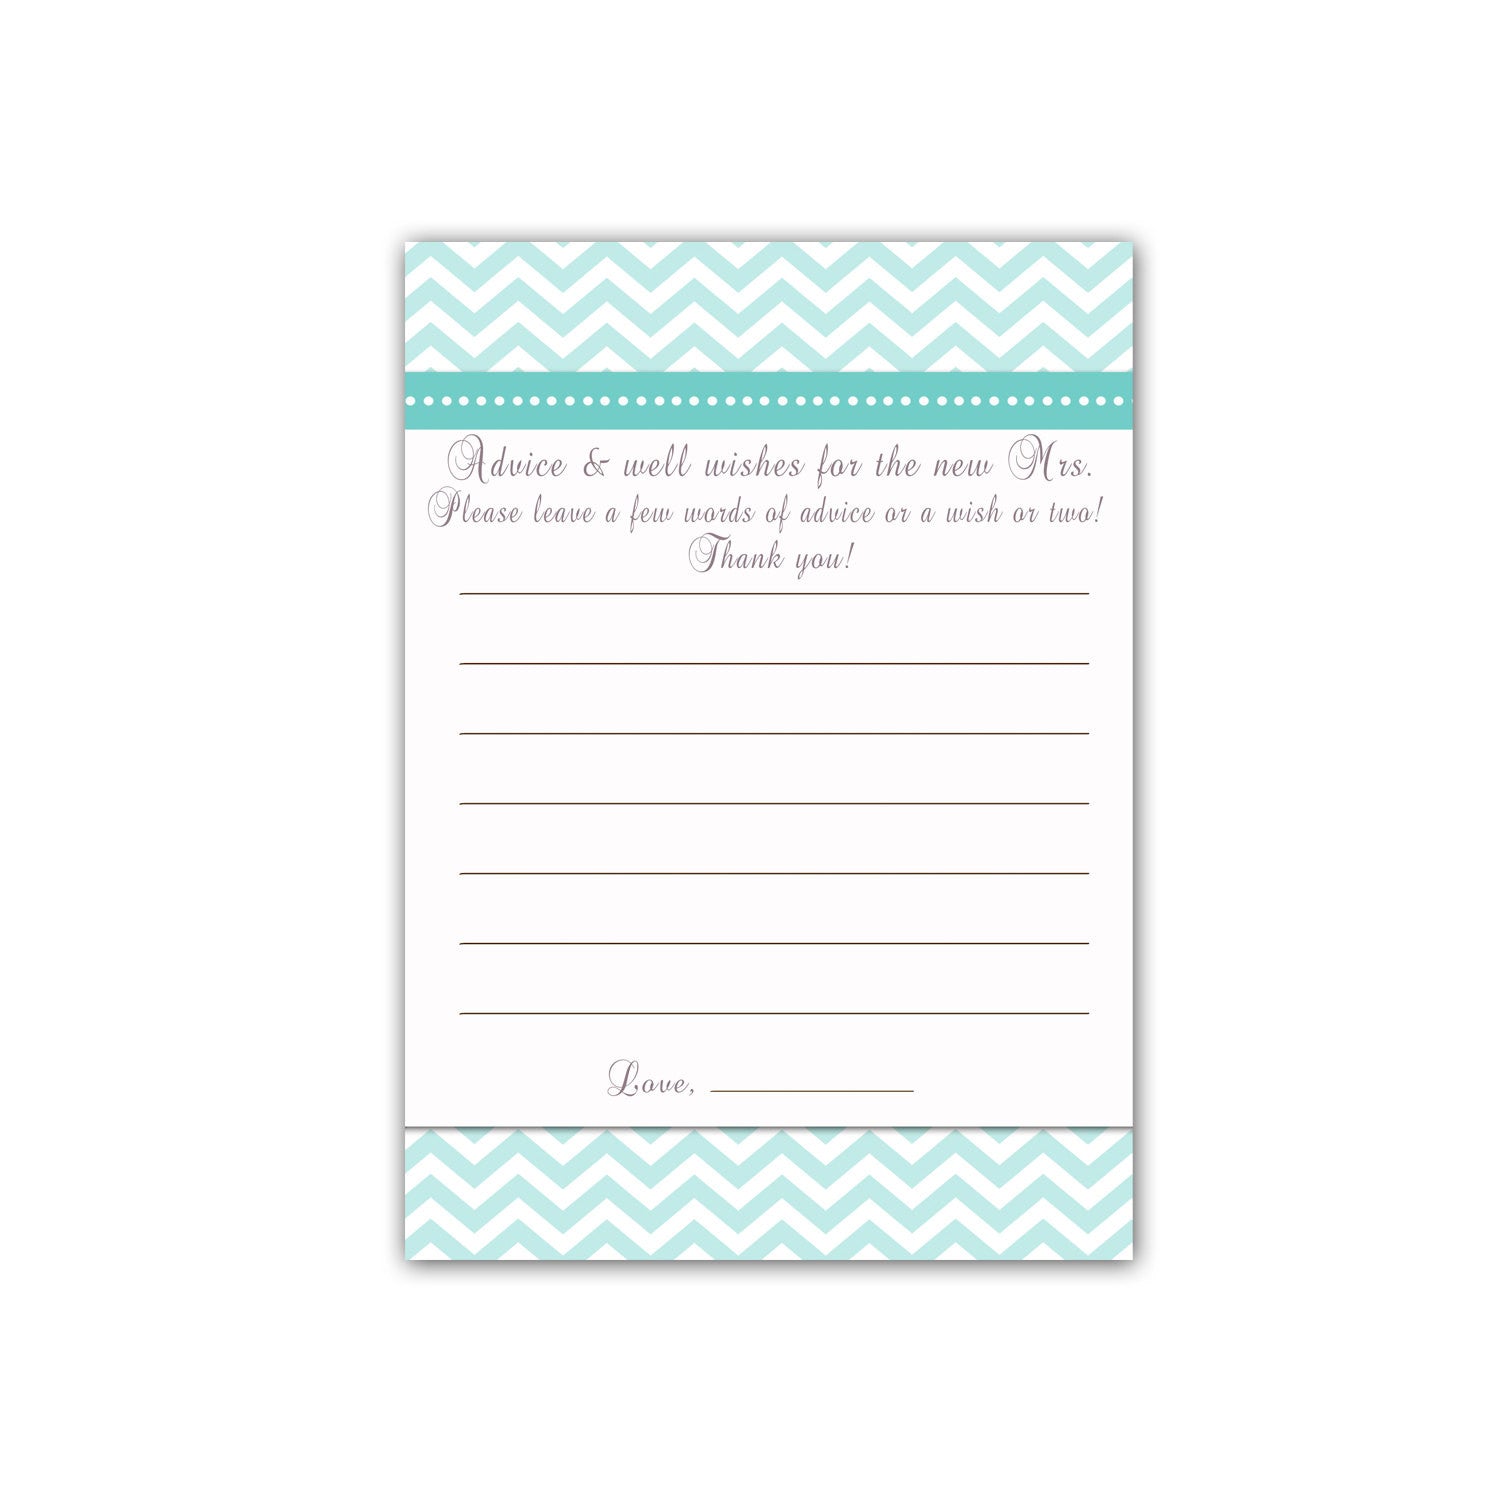 INSTANT DOWNLOAD Turquoise Chevron Bridal Shower Advice Cards - Advice For Happy Marriage Favors Bridal Shower Favors Wedding Favors Zigzag